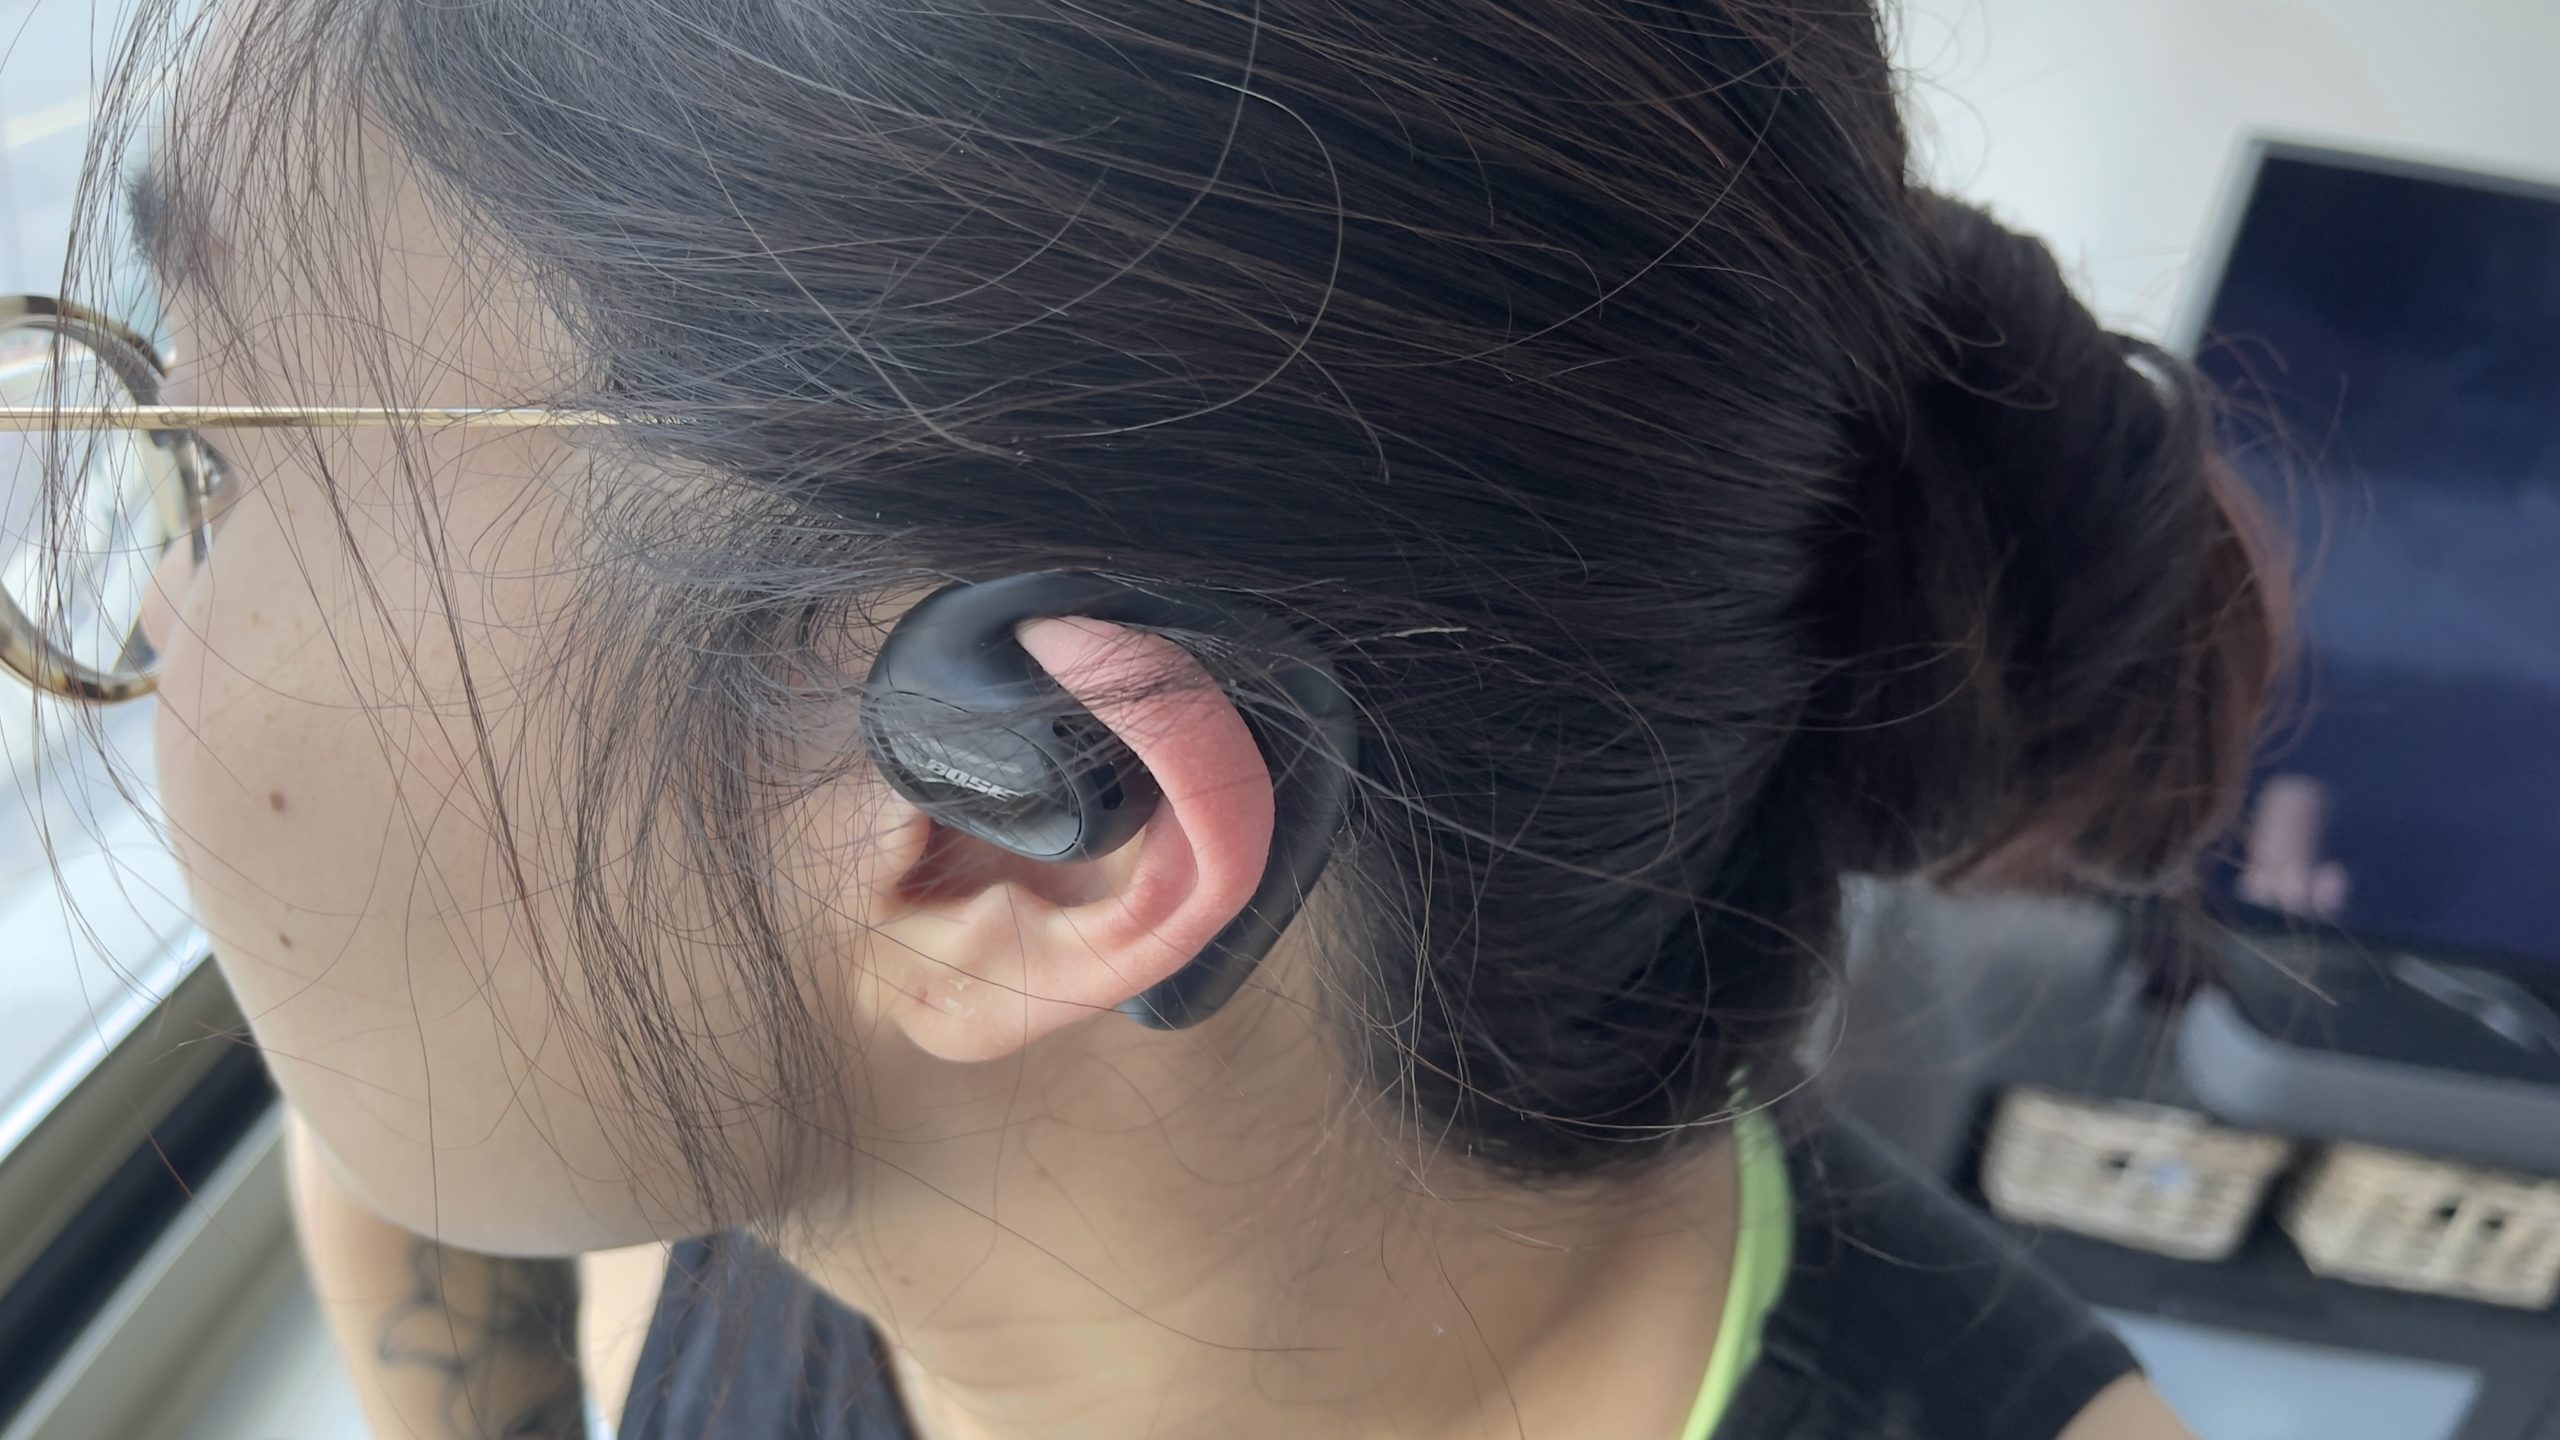 See how the back part bends the top of my ear down? It stays put, but it's crowded back there. (Photo: Victoria Song/Gizmodo)